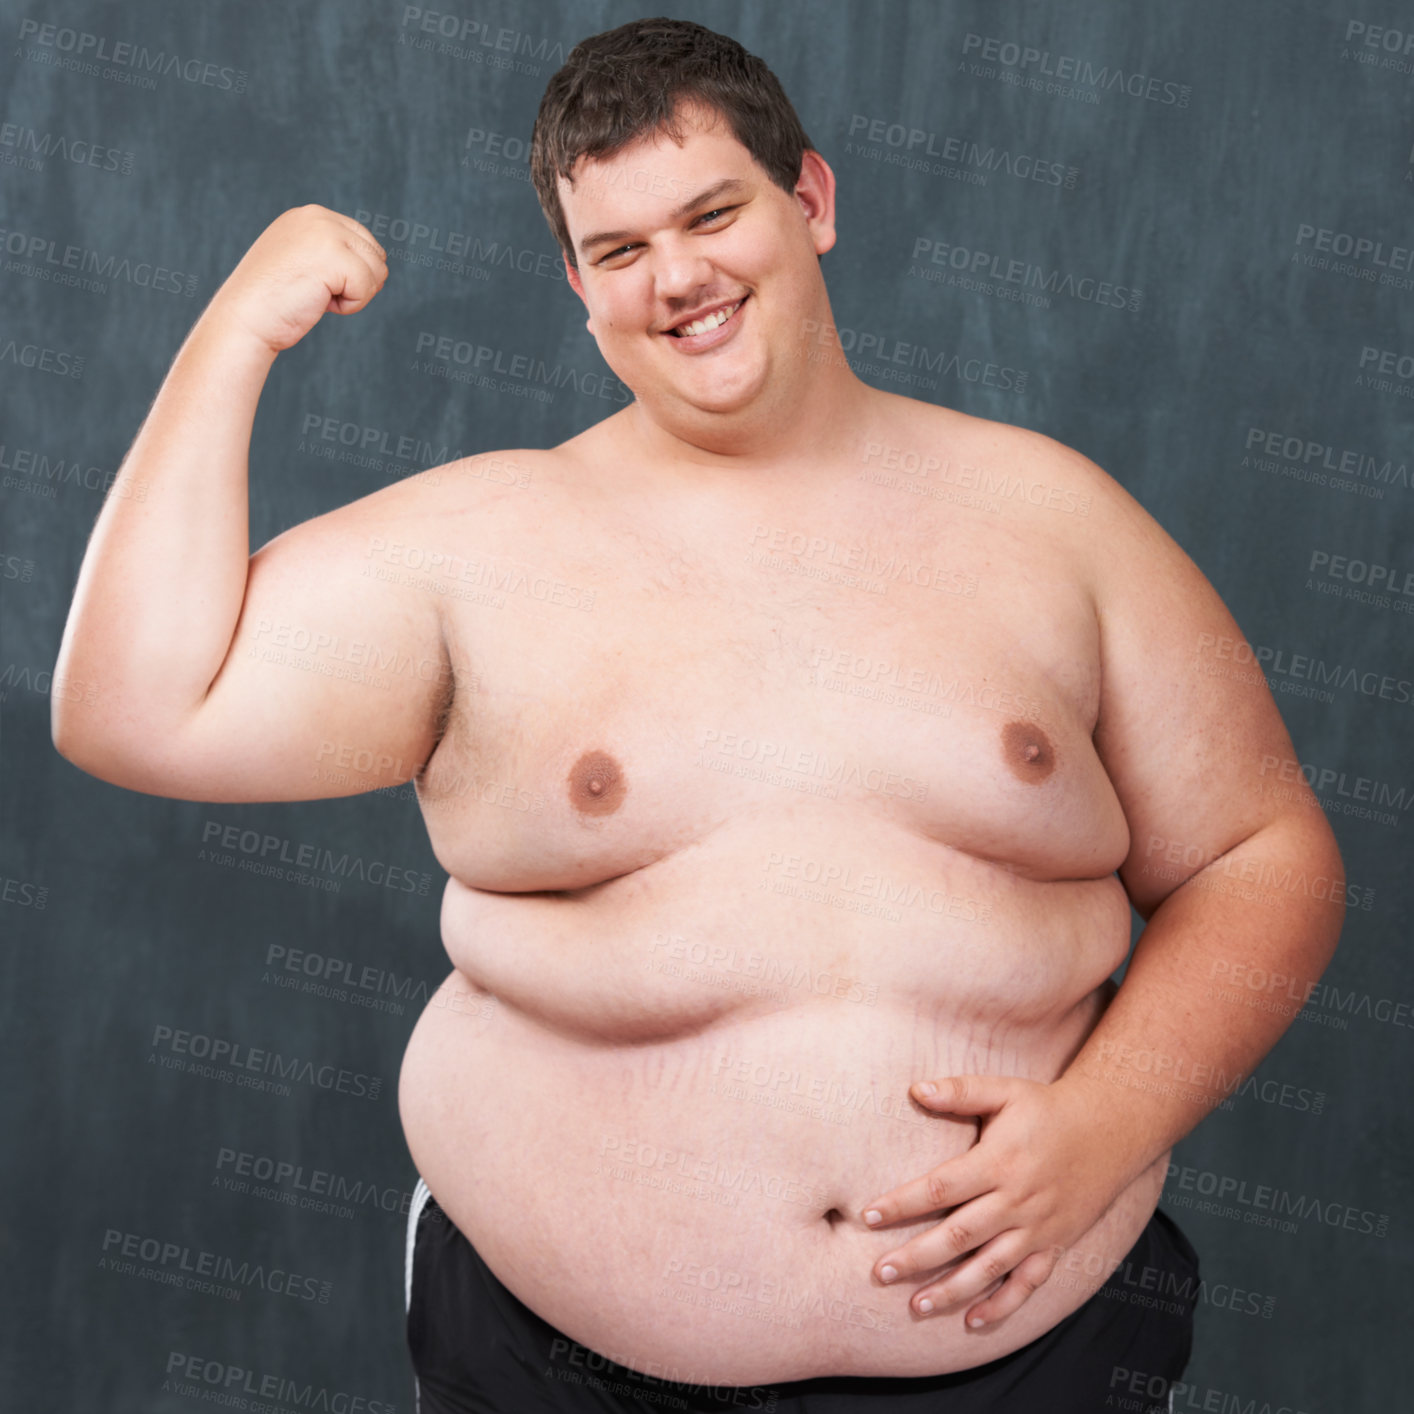 Studio shot of an obese young shirtless man flexing his bicep - stock photo...